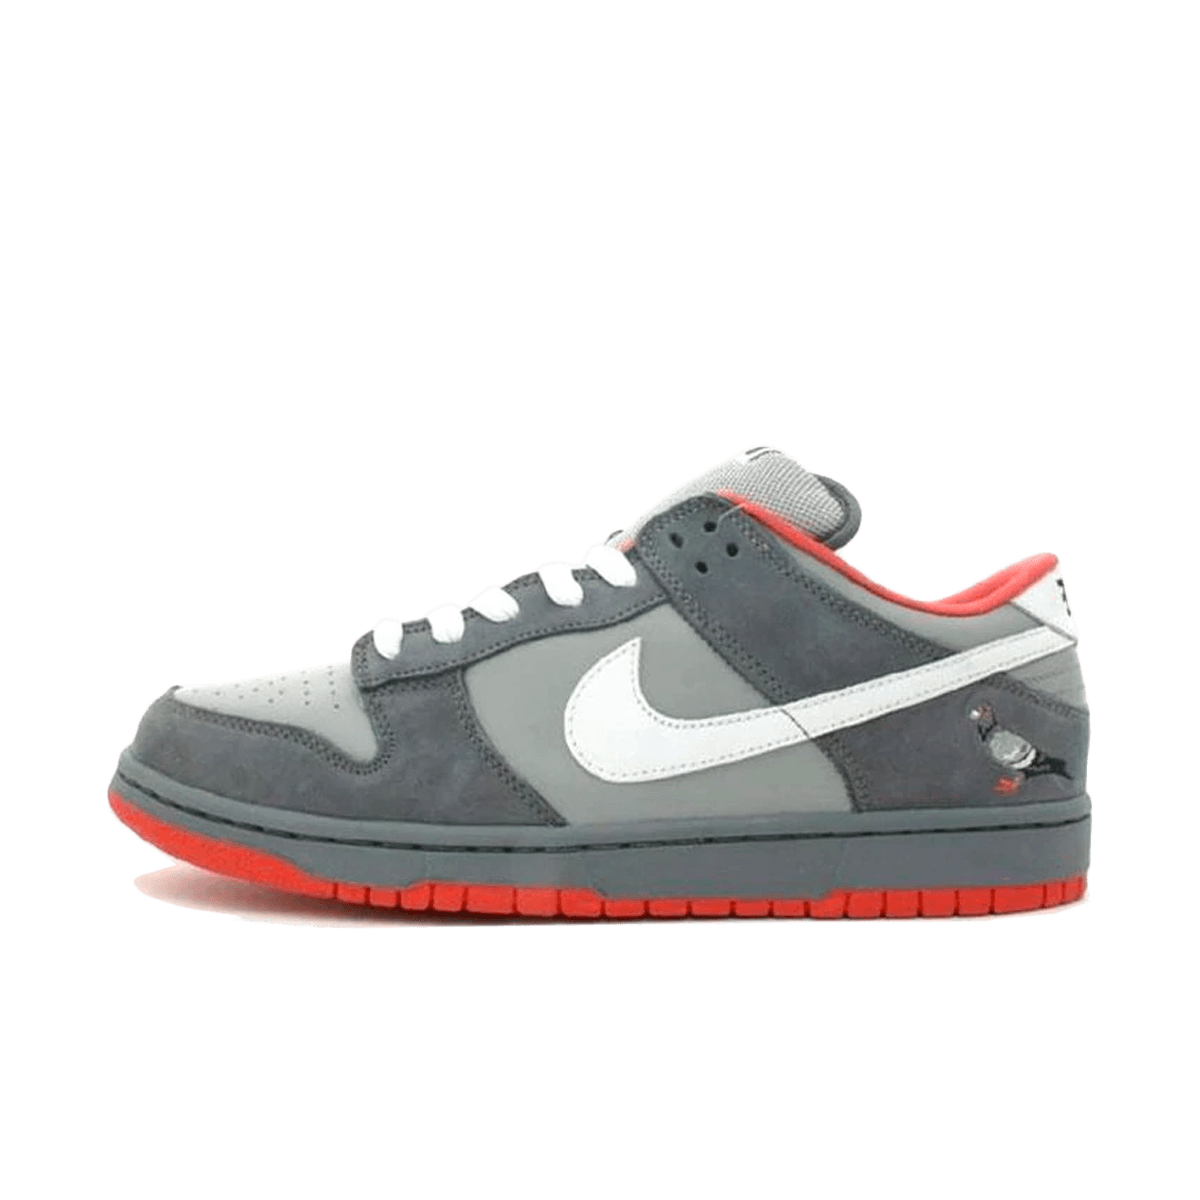 Nike SB Dunk Low Pro 'NY Pigeon' - City Pack 304292-011